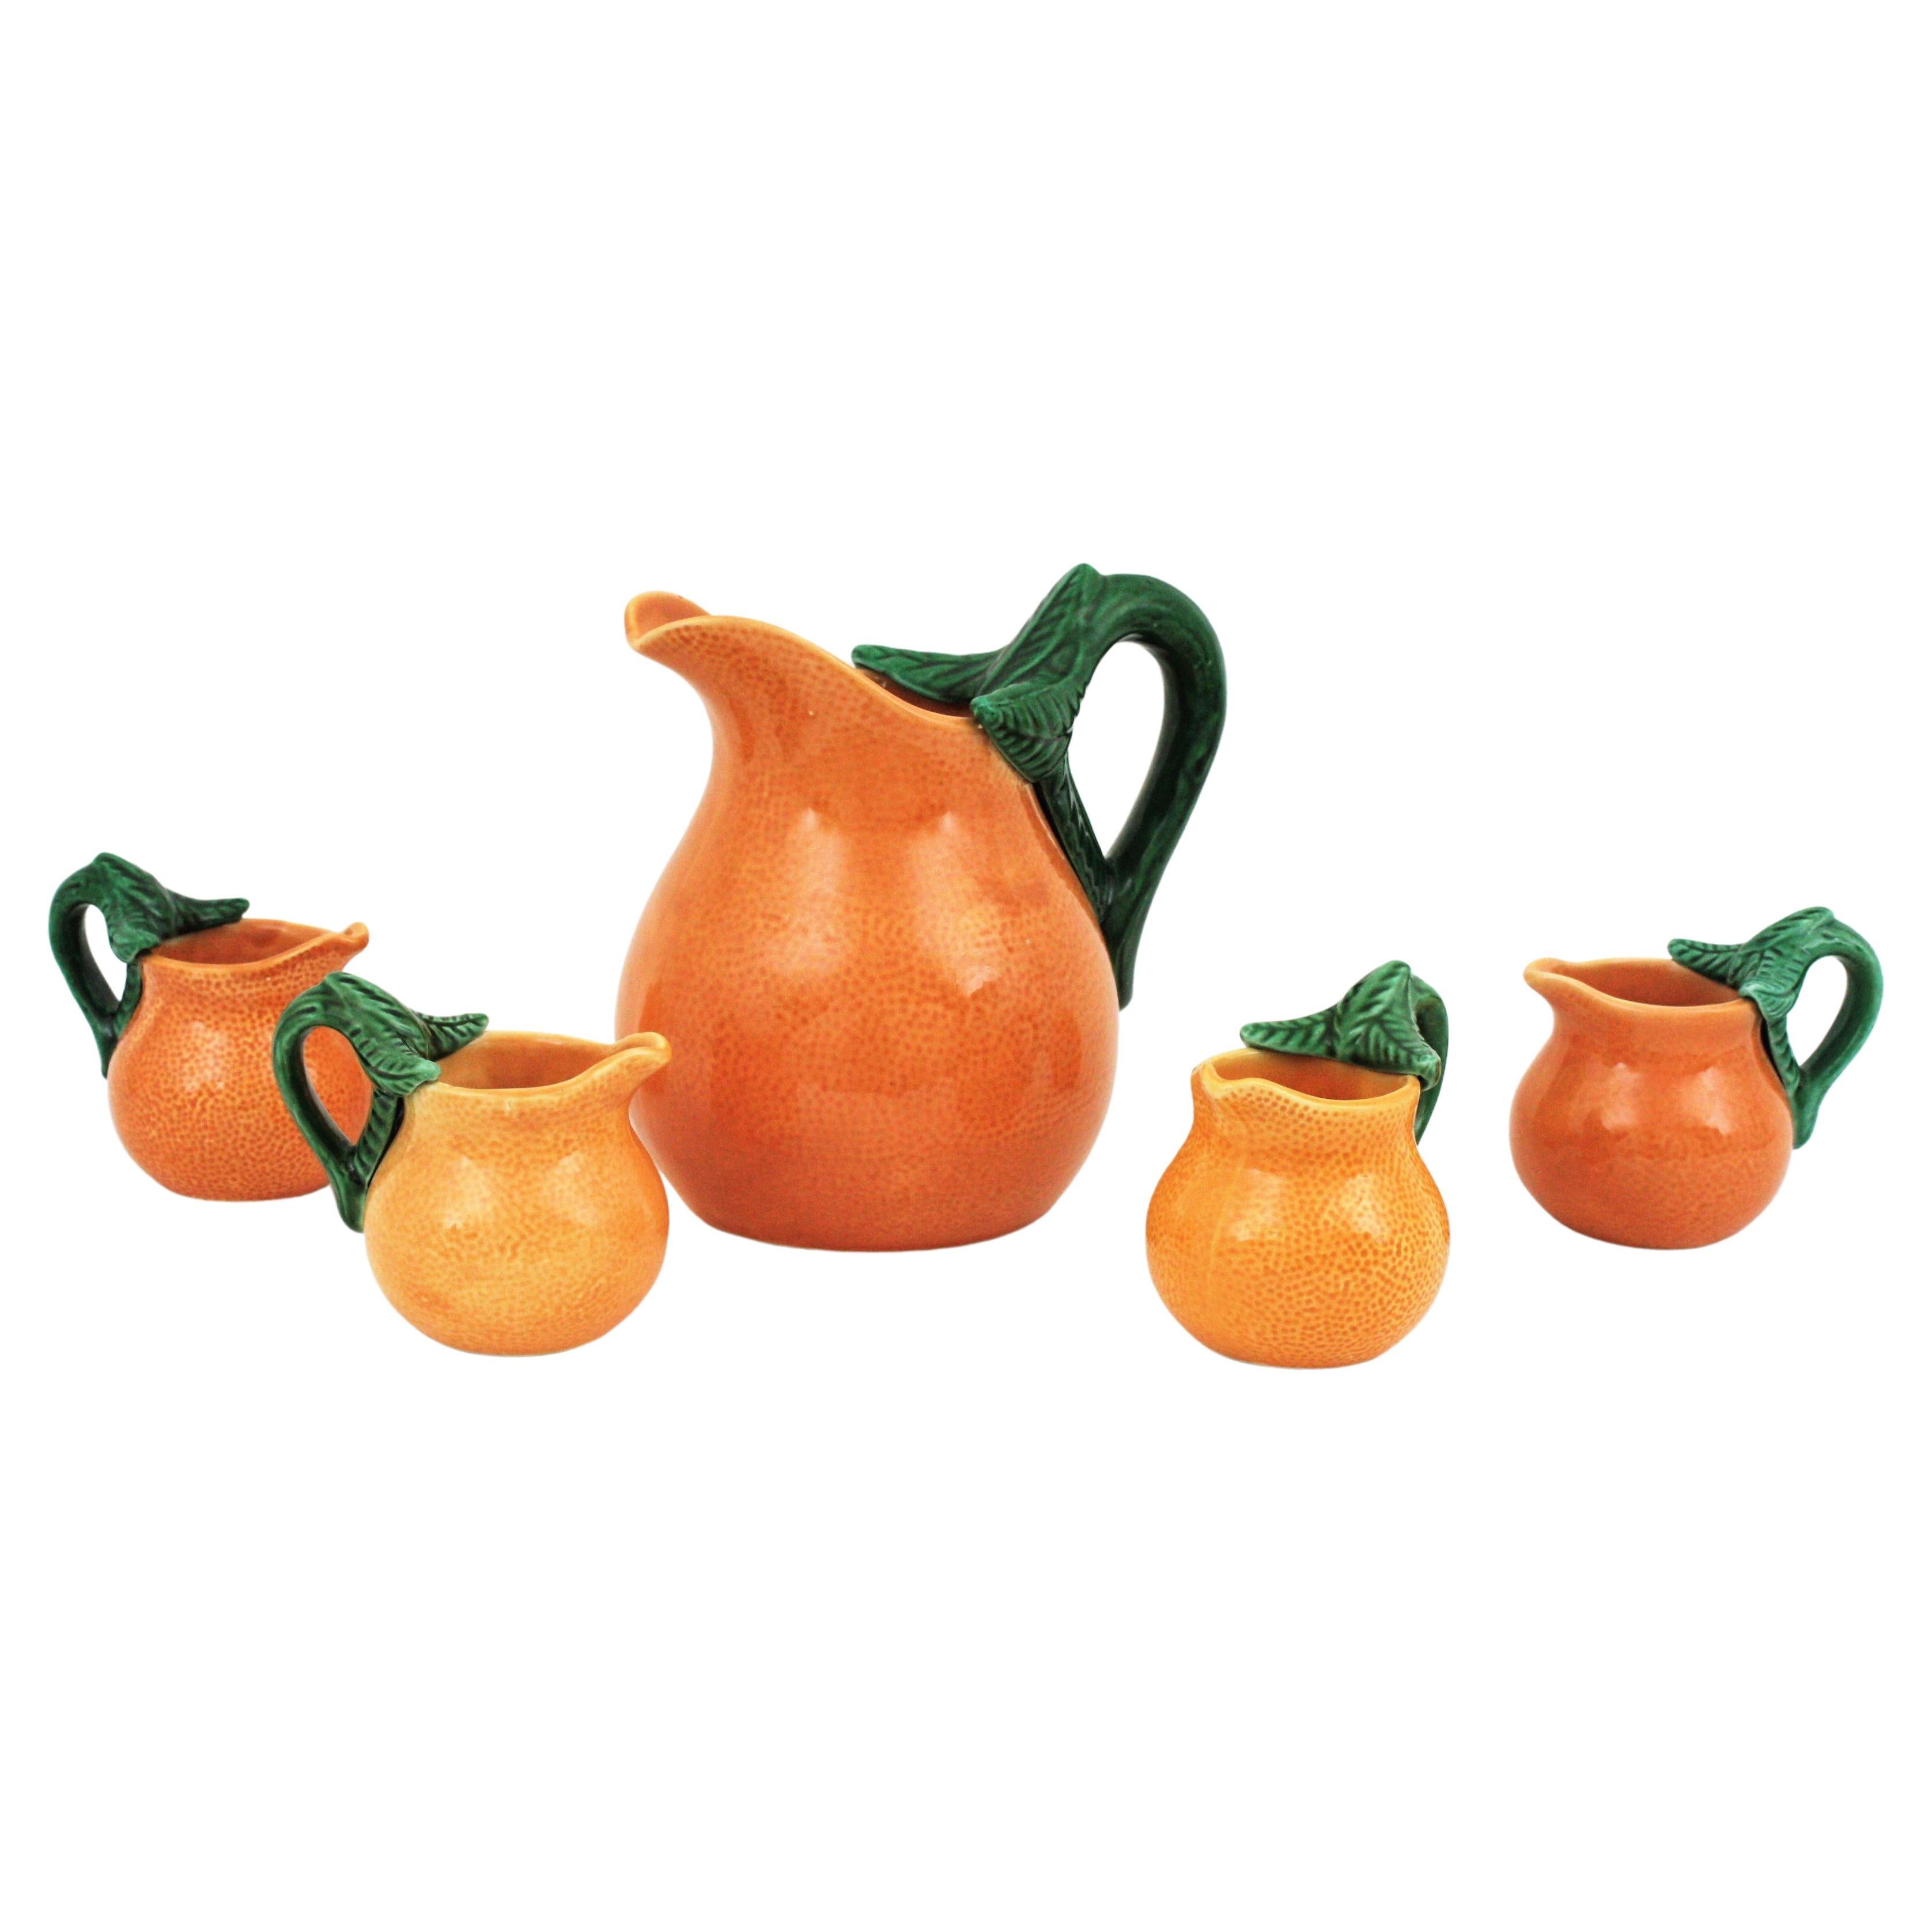 Sold at Auction: Collection Seven Pottery Fruit / Vegetable Pitcher